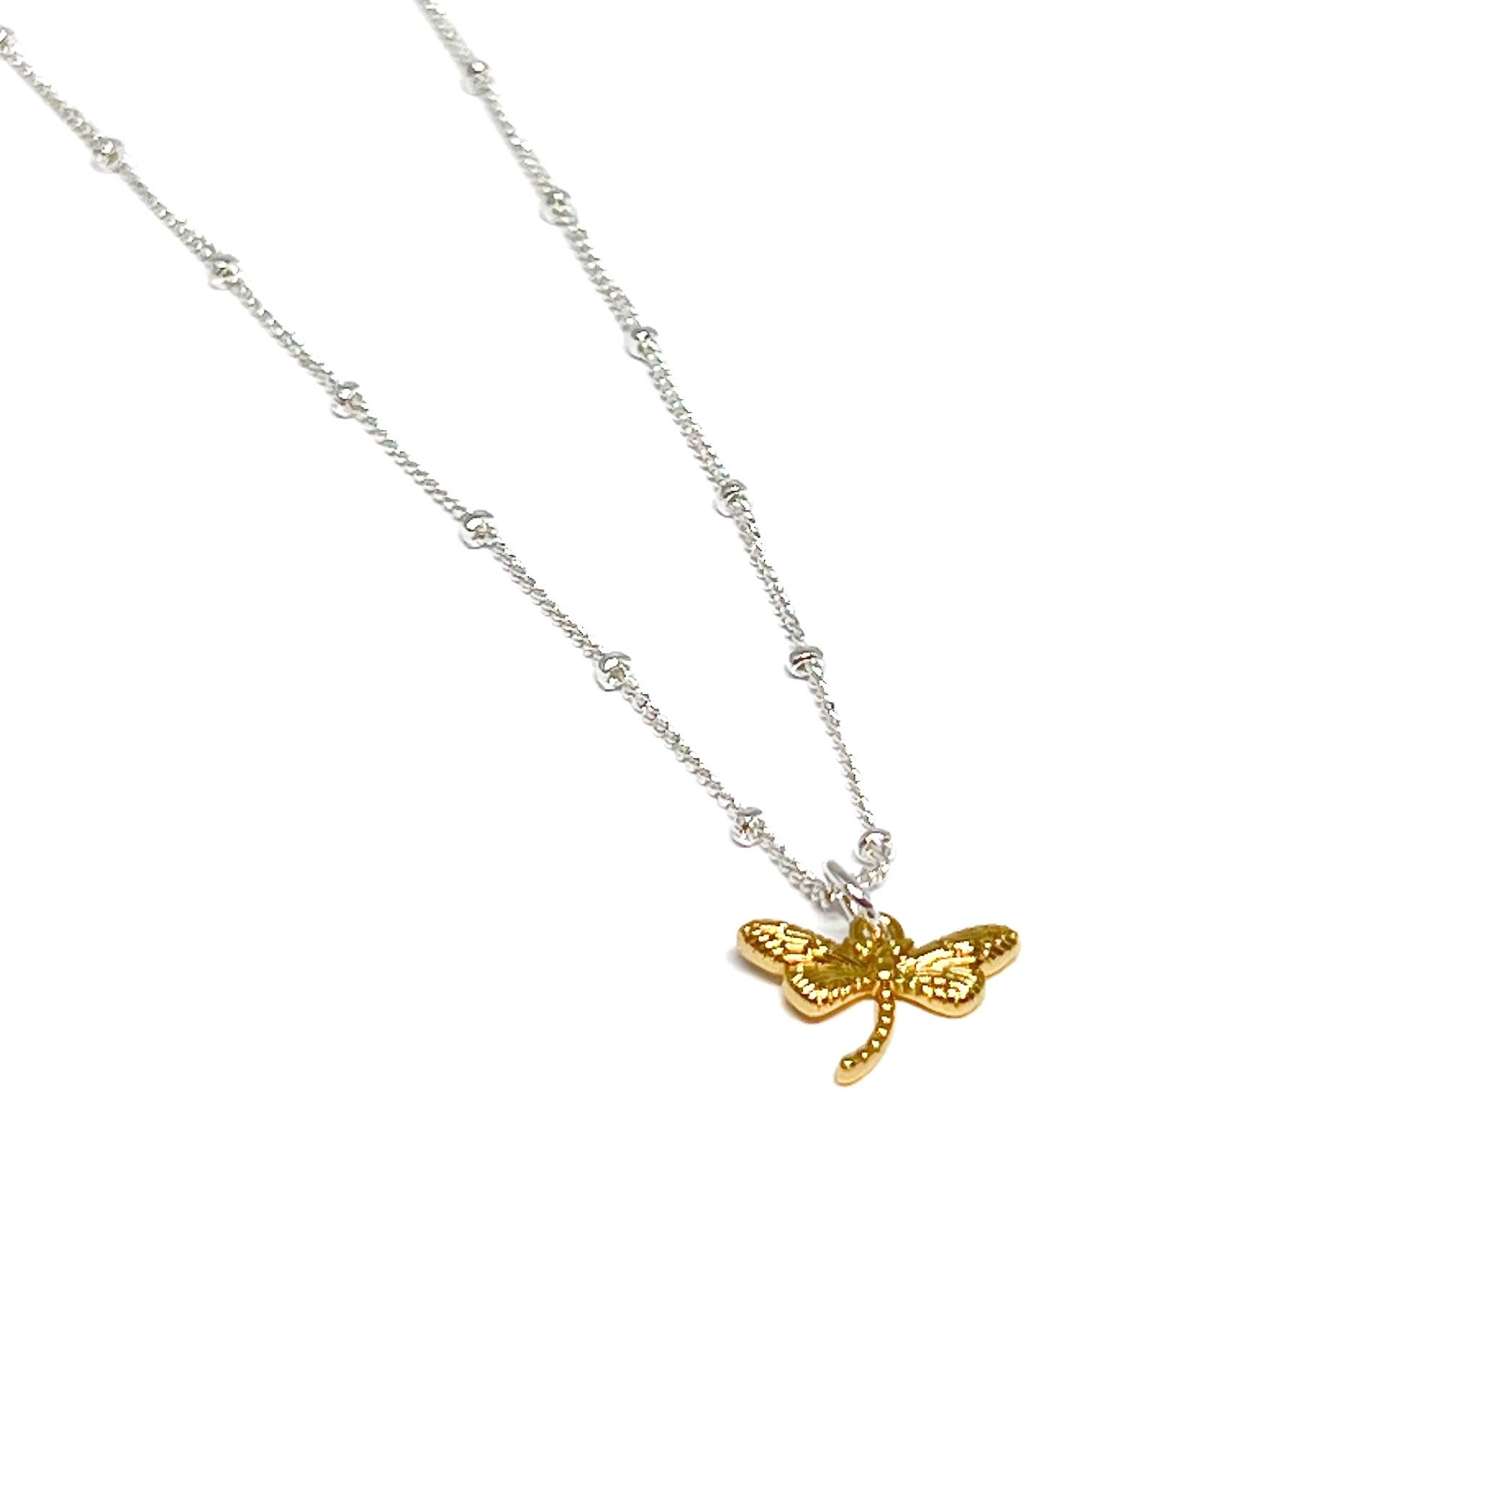 Sierra Dragonfly Necklace - Gold